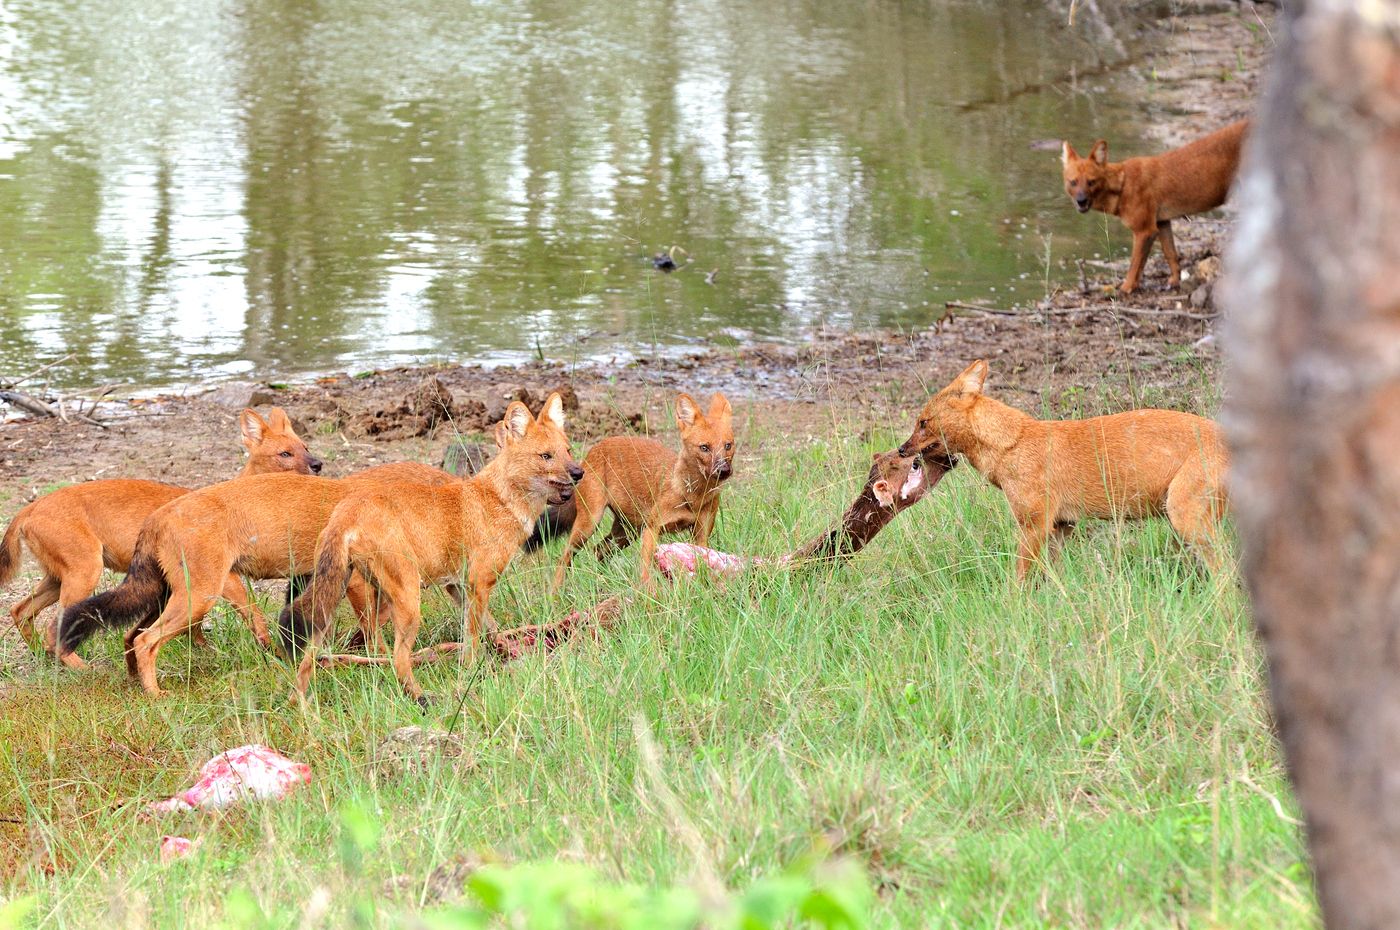 Early summer morning in Bandipur National Park. Dholes hunt in packs, like the African wild dog, and are excellent hunters. Seeing them devour their prey is a rare and exceptional sight